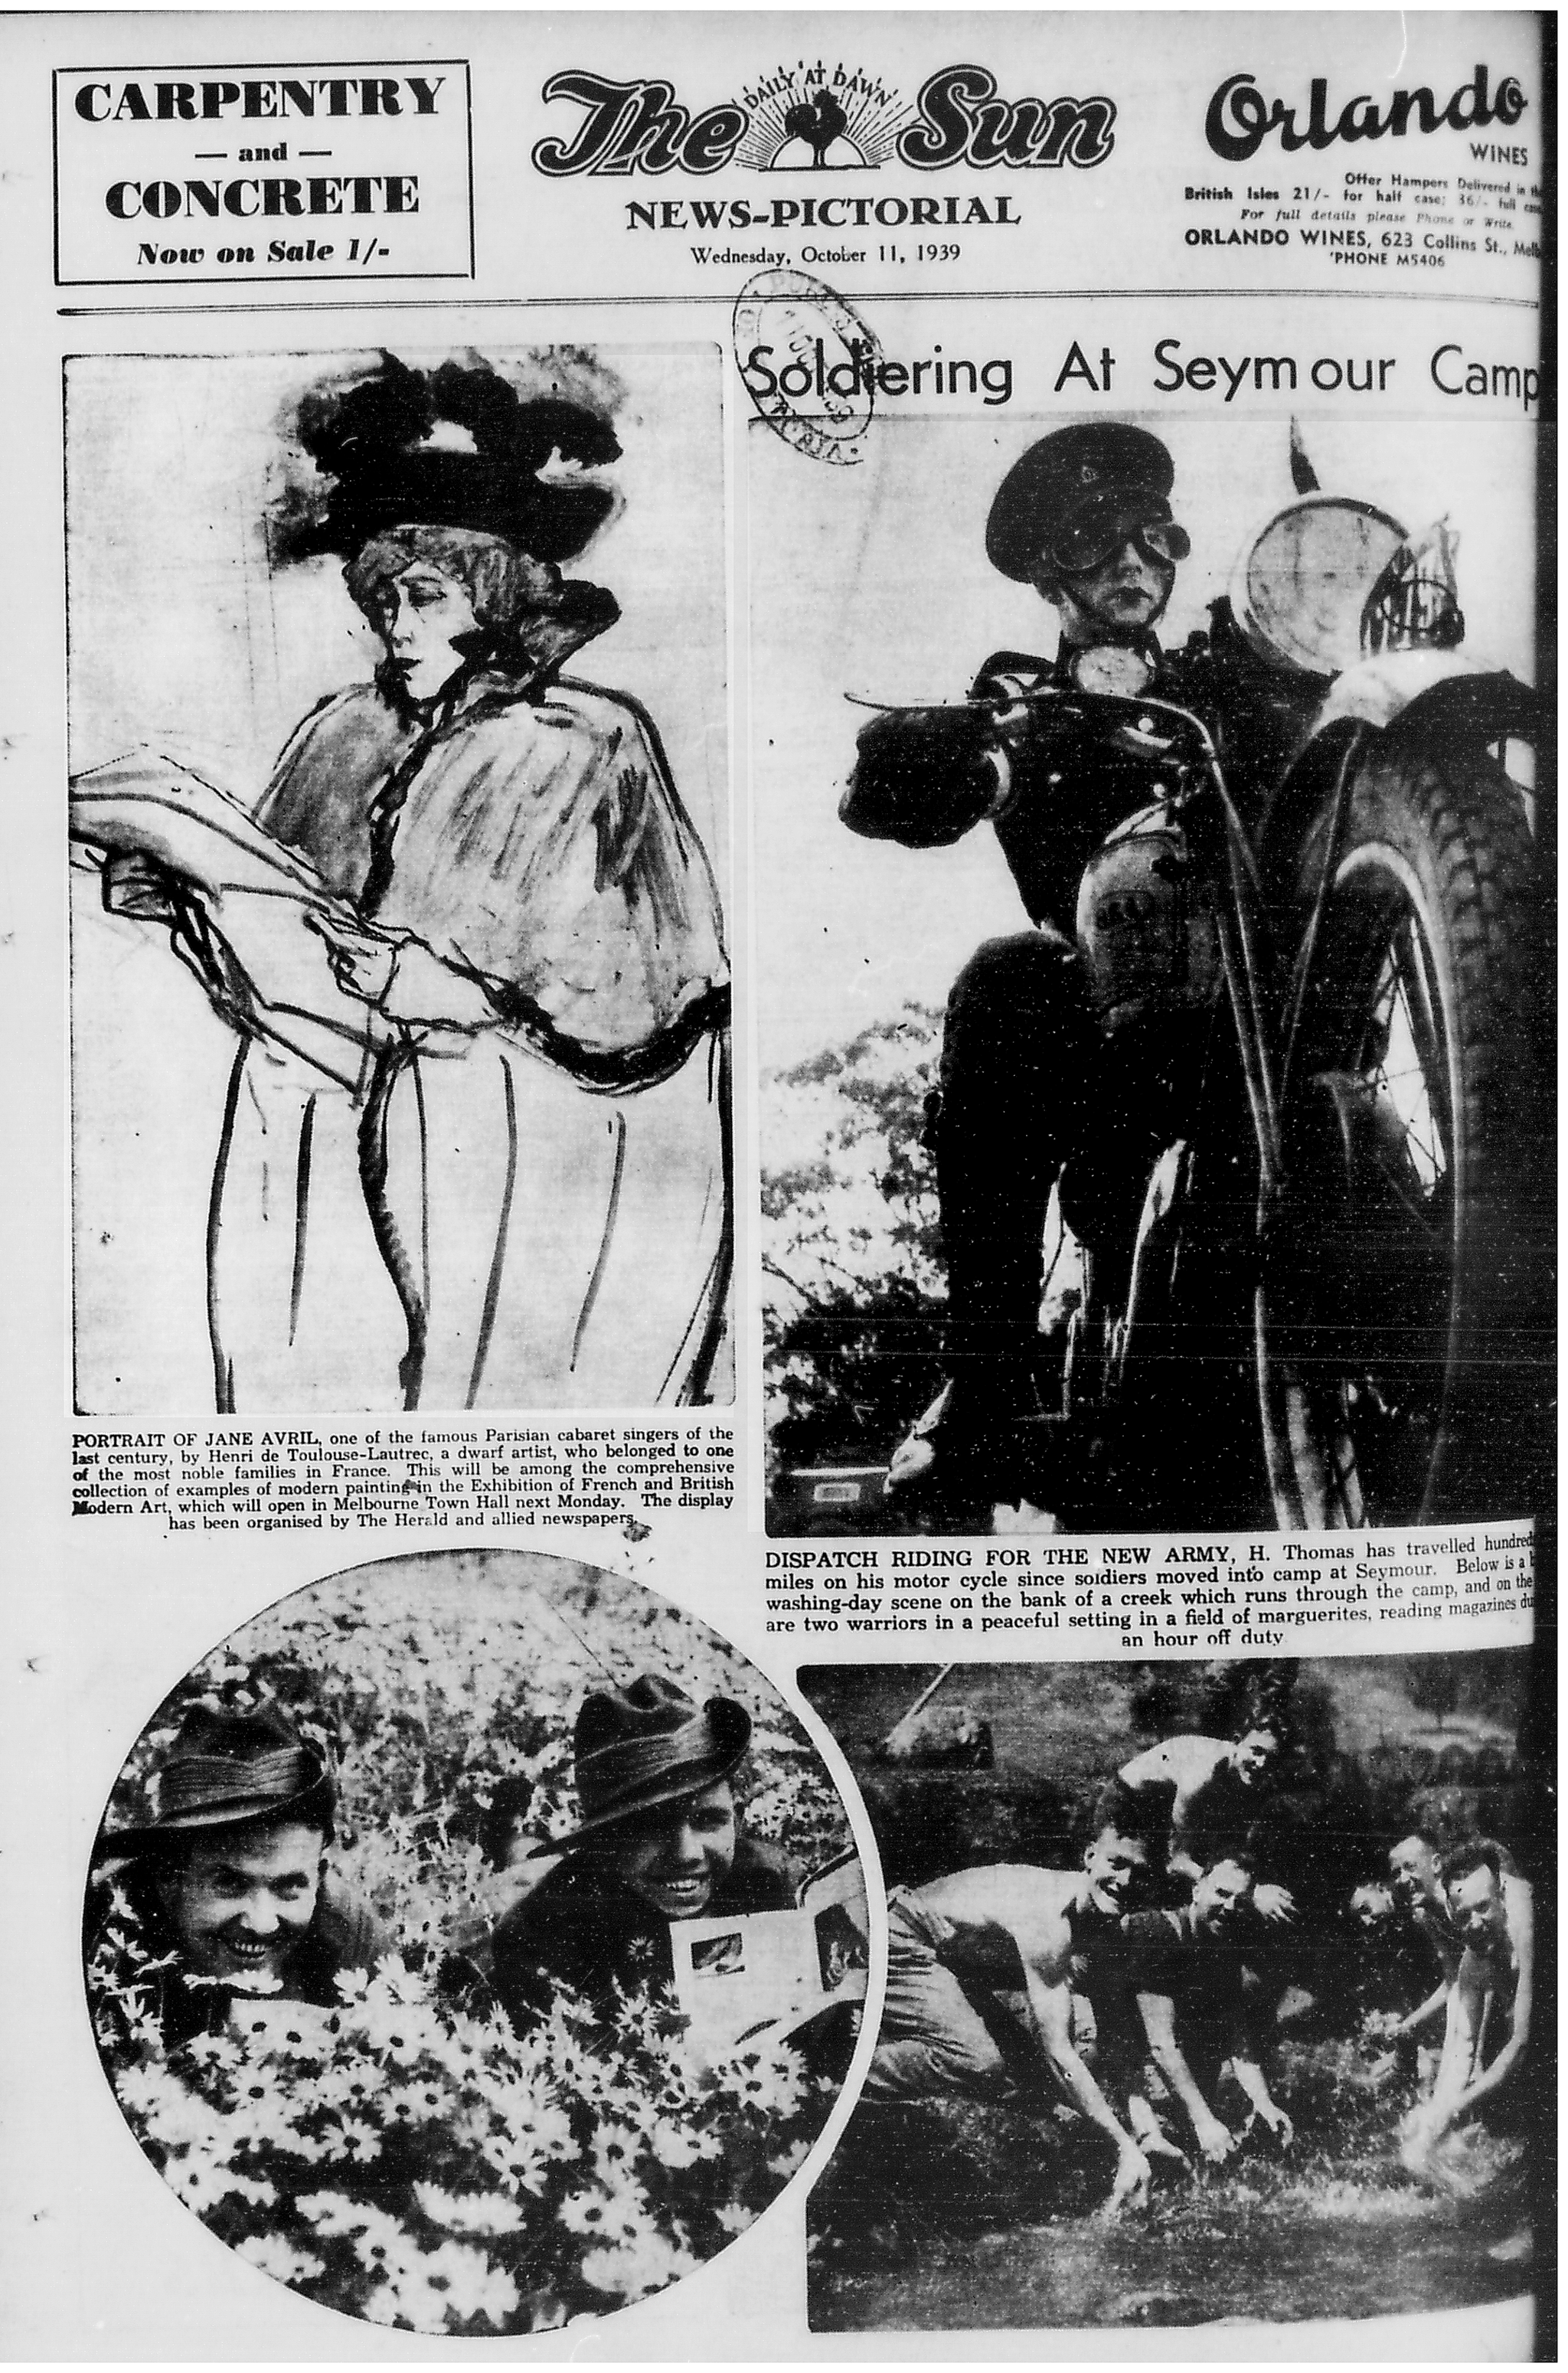 A black and white photograph of the front of what seems to be a newspaper. The top of it has a drawing of a woman holding a sheet of paper, and figure on a motorcycle. The bottom has an image of two people in a field of flowers along with a photo of a group of people near water.